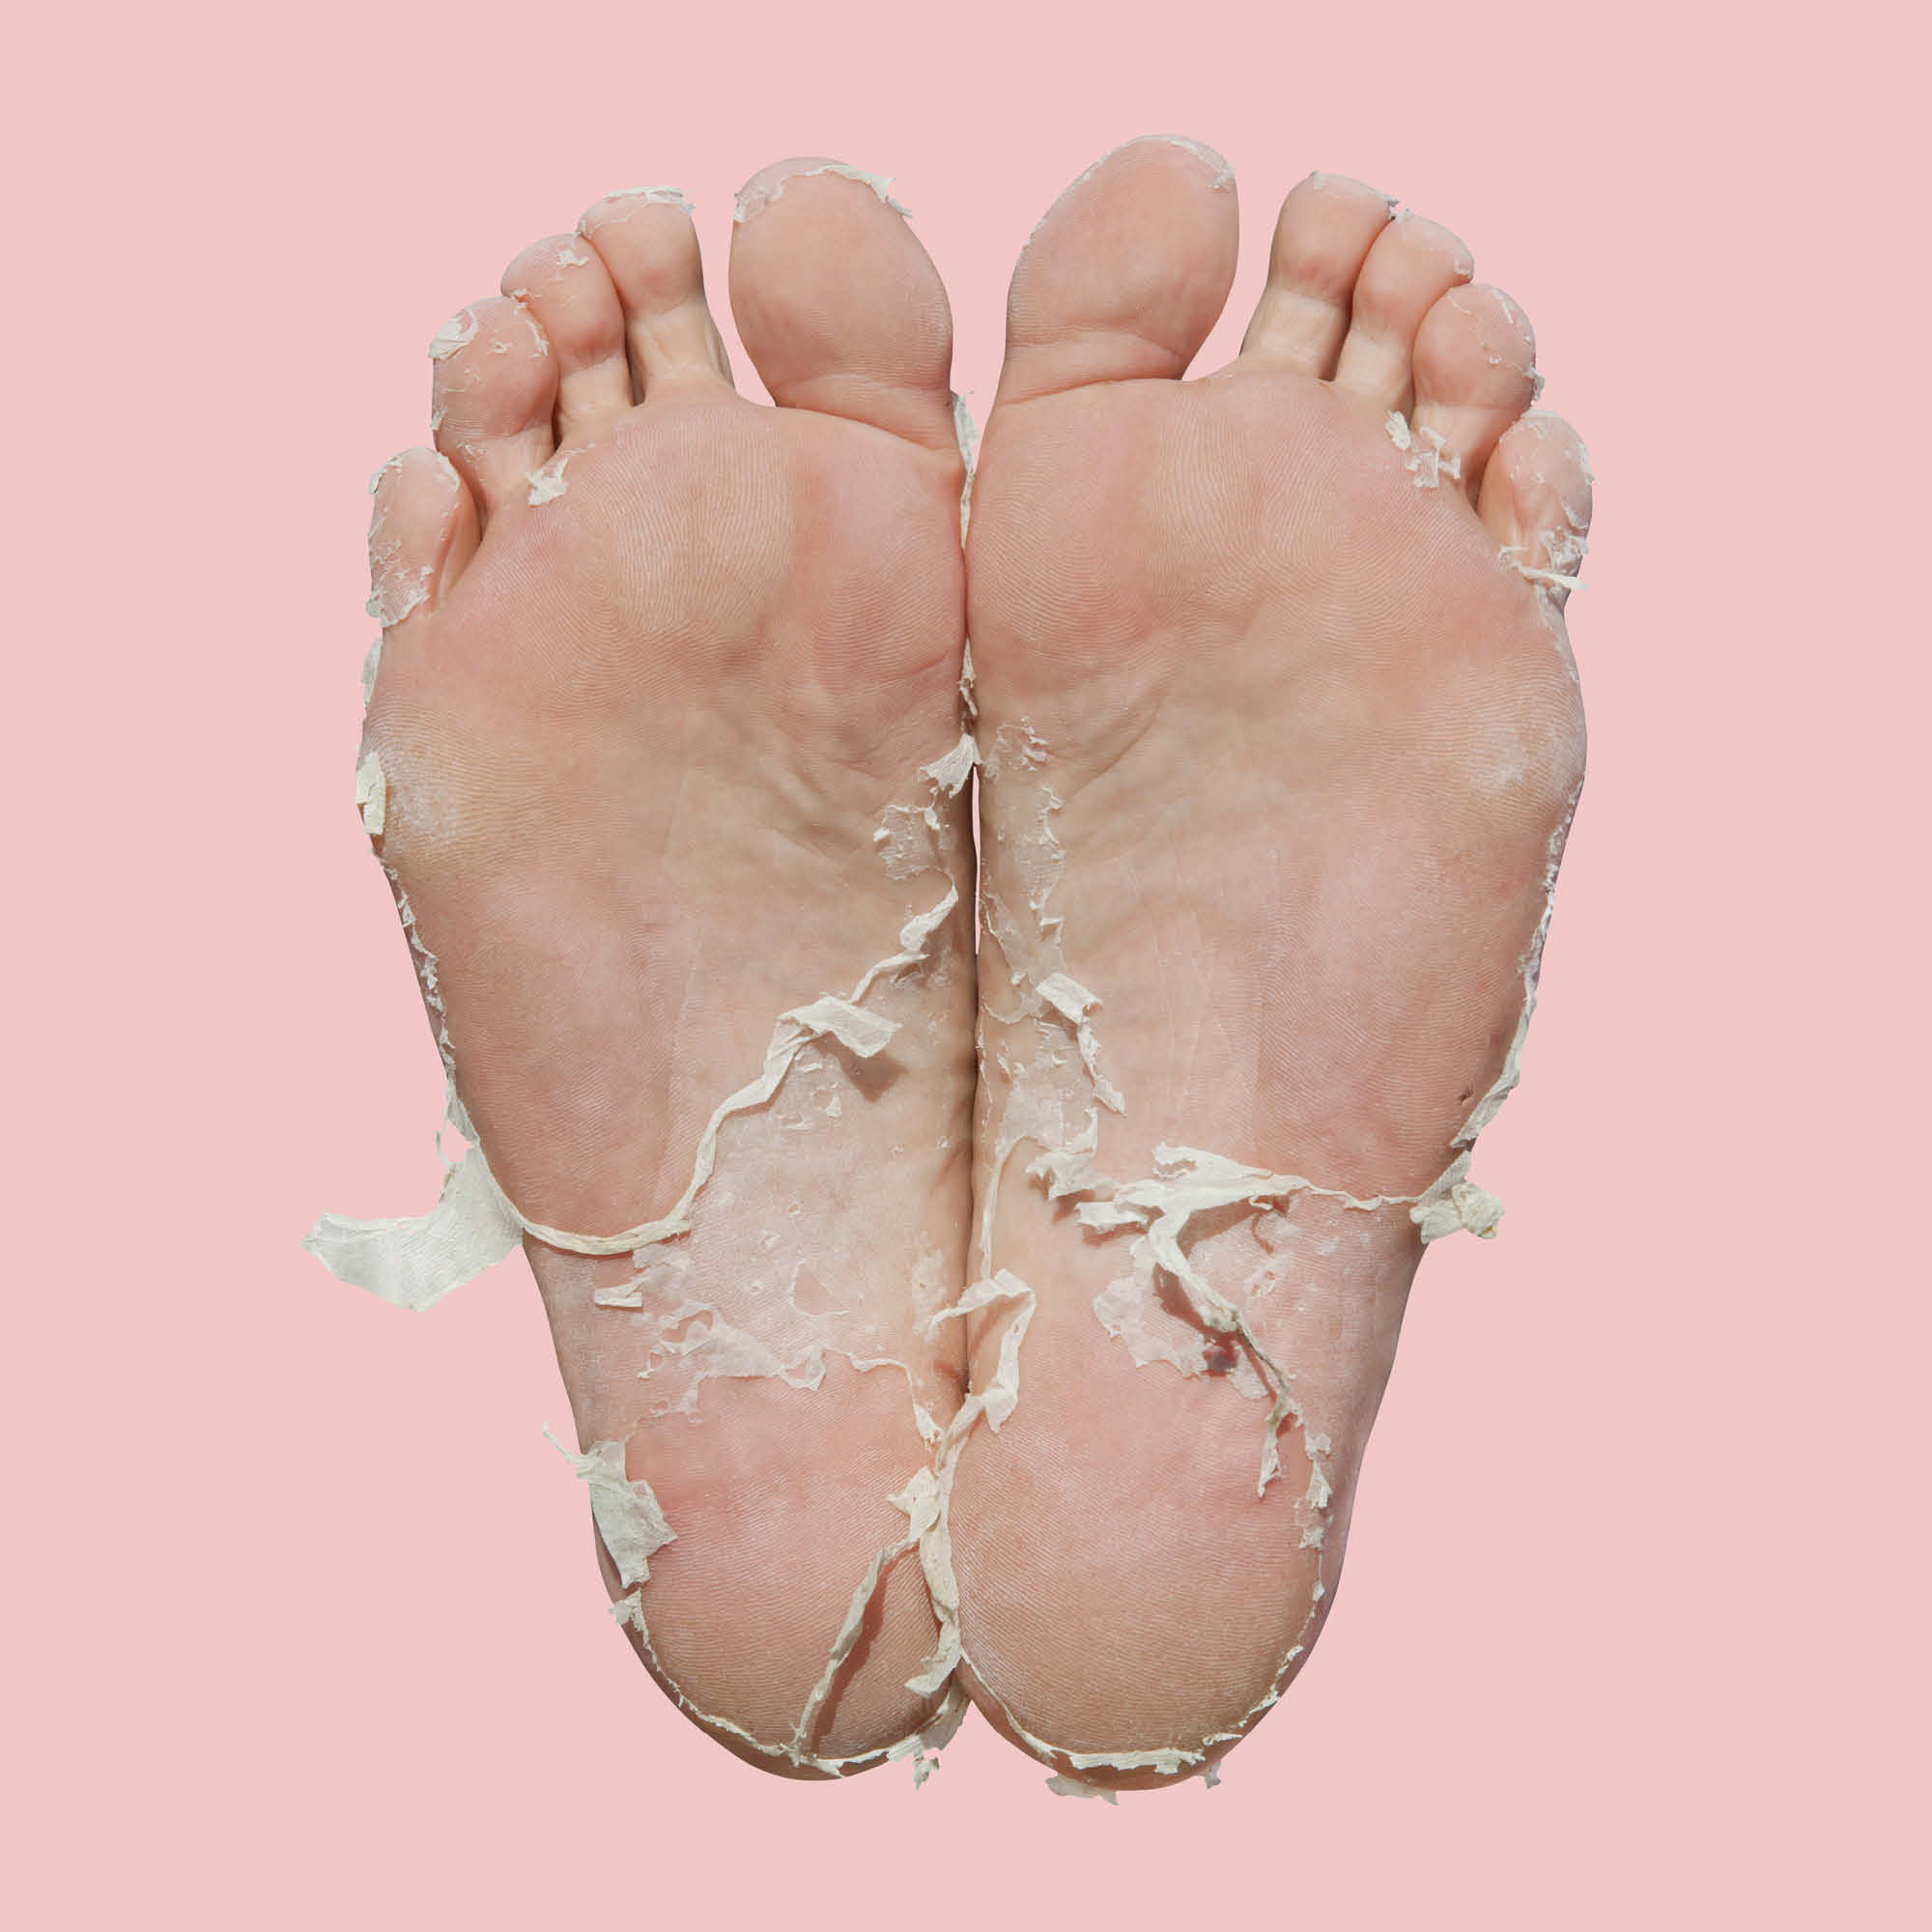 This foot peel mask provides soft, smooth results that fans love